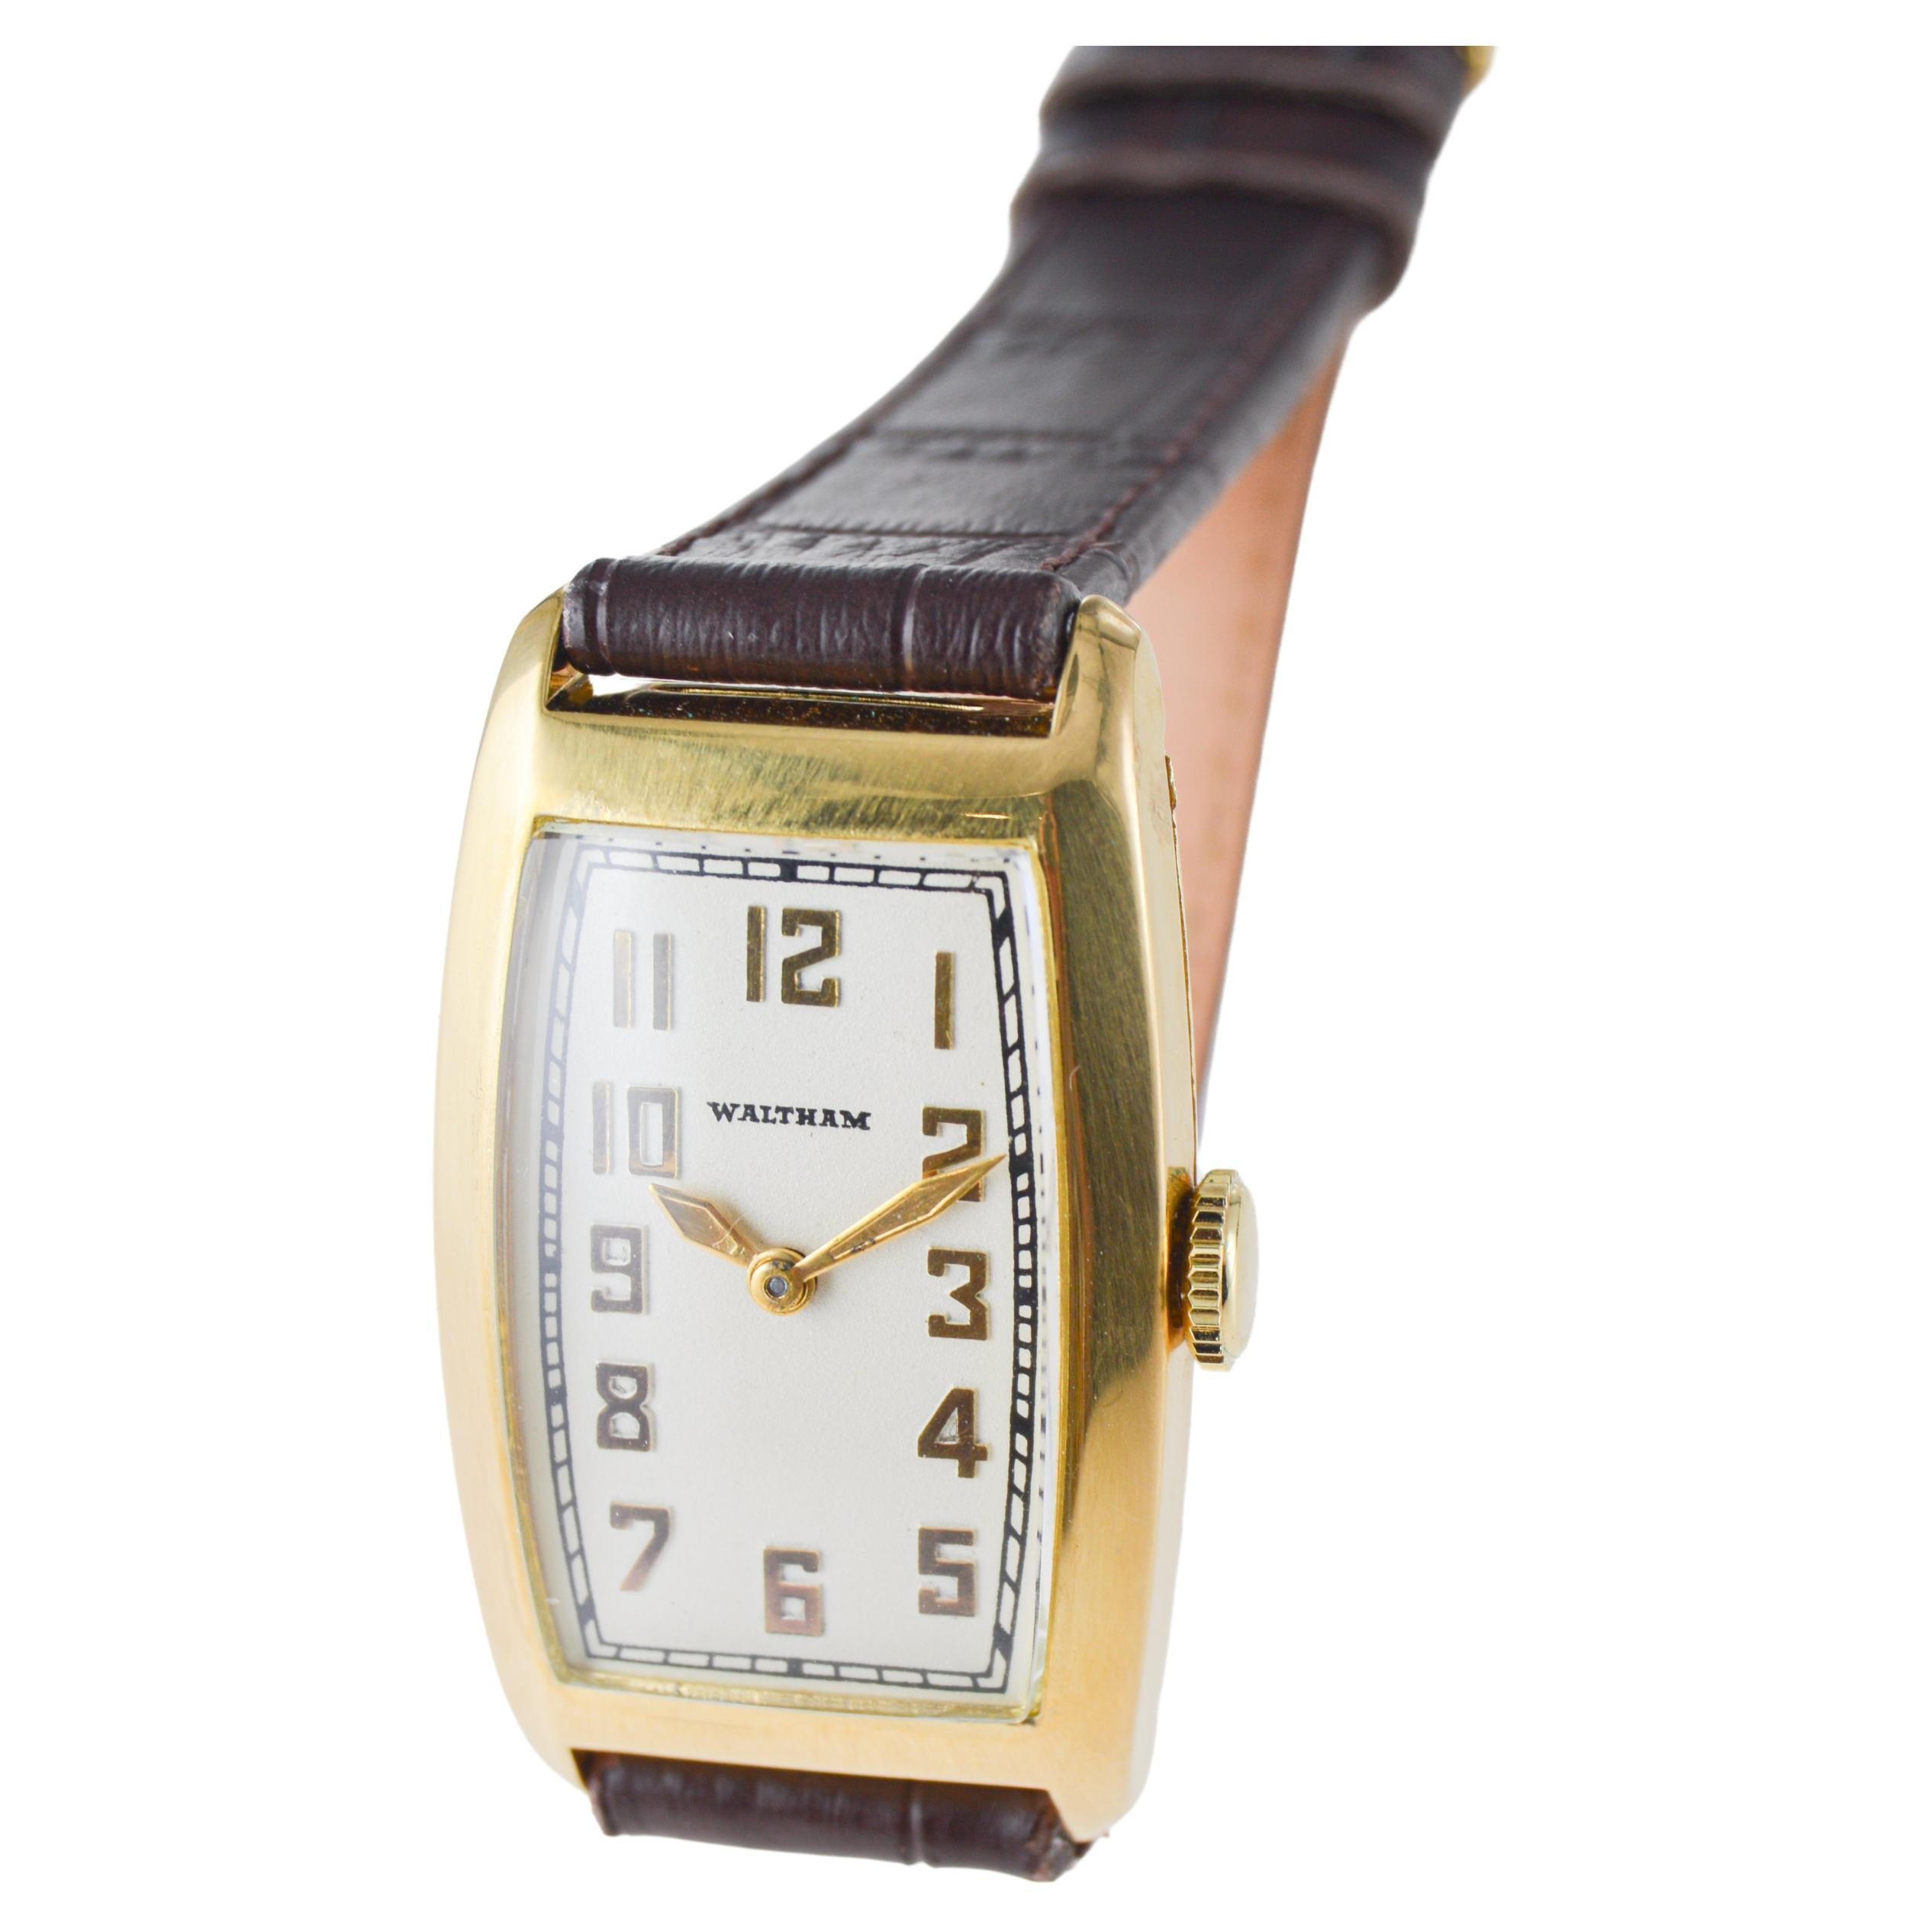 Waltham Gold Filled Art Deco Tonneau Watch with Flawless Original Dial From 1934 For Sale 3